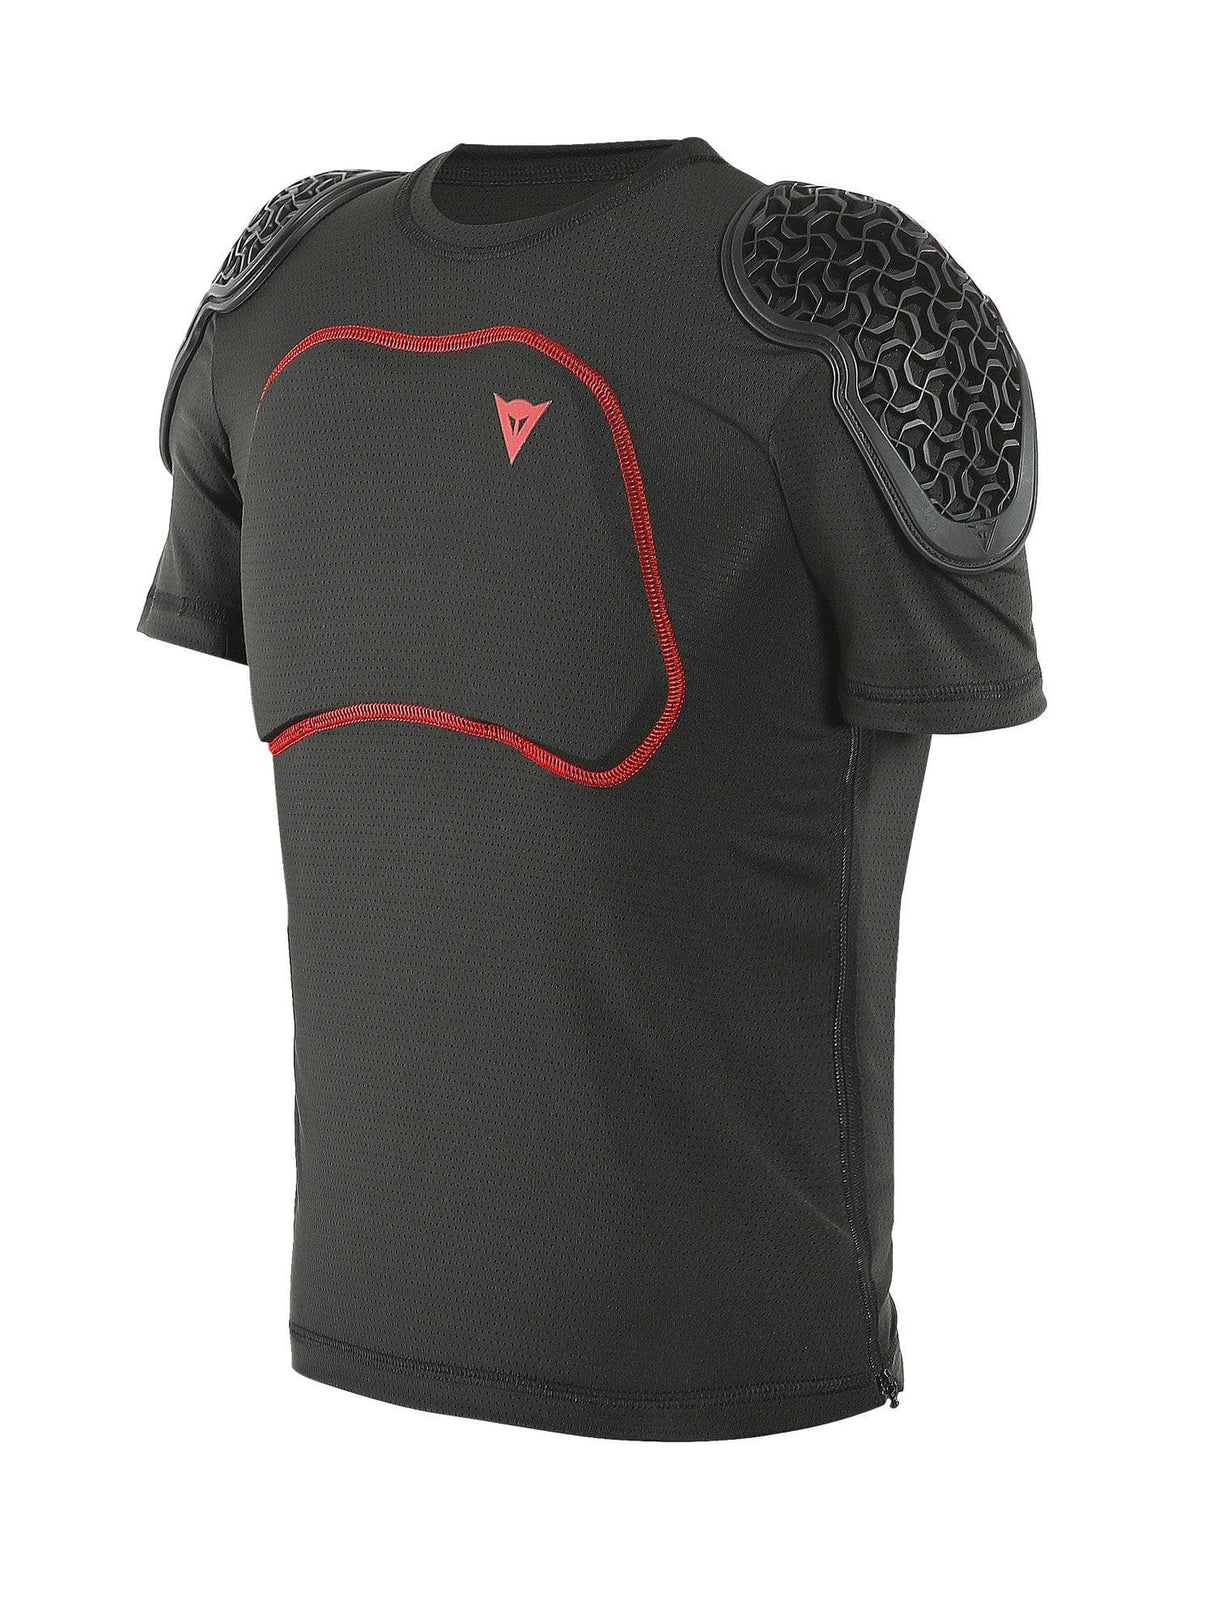 Dainese Scarabeo Pro Juniour Safety Tee (Black, M)